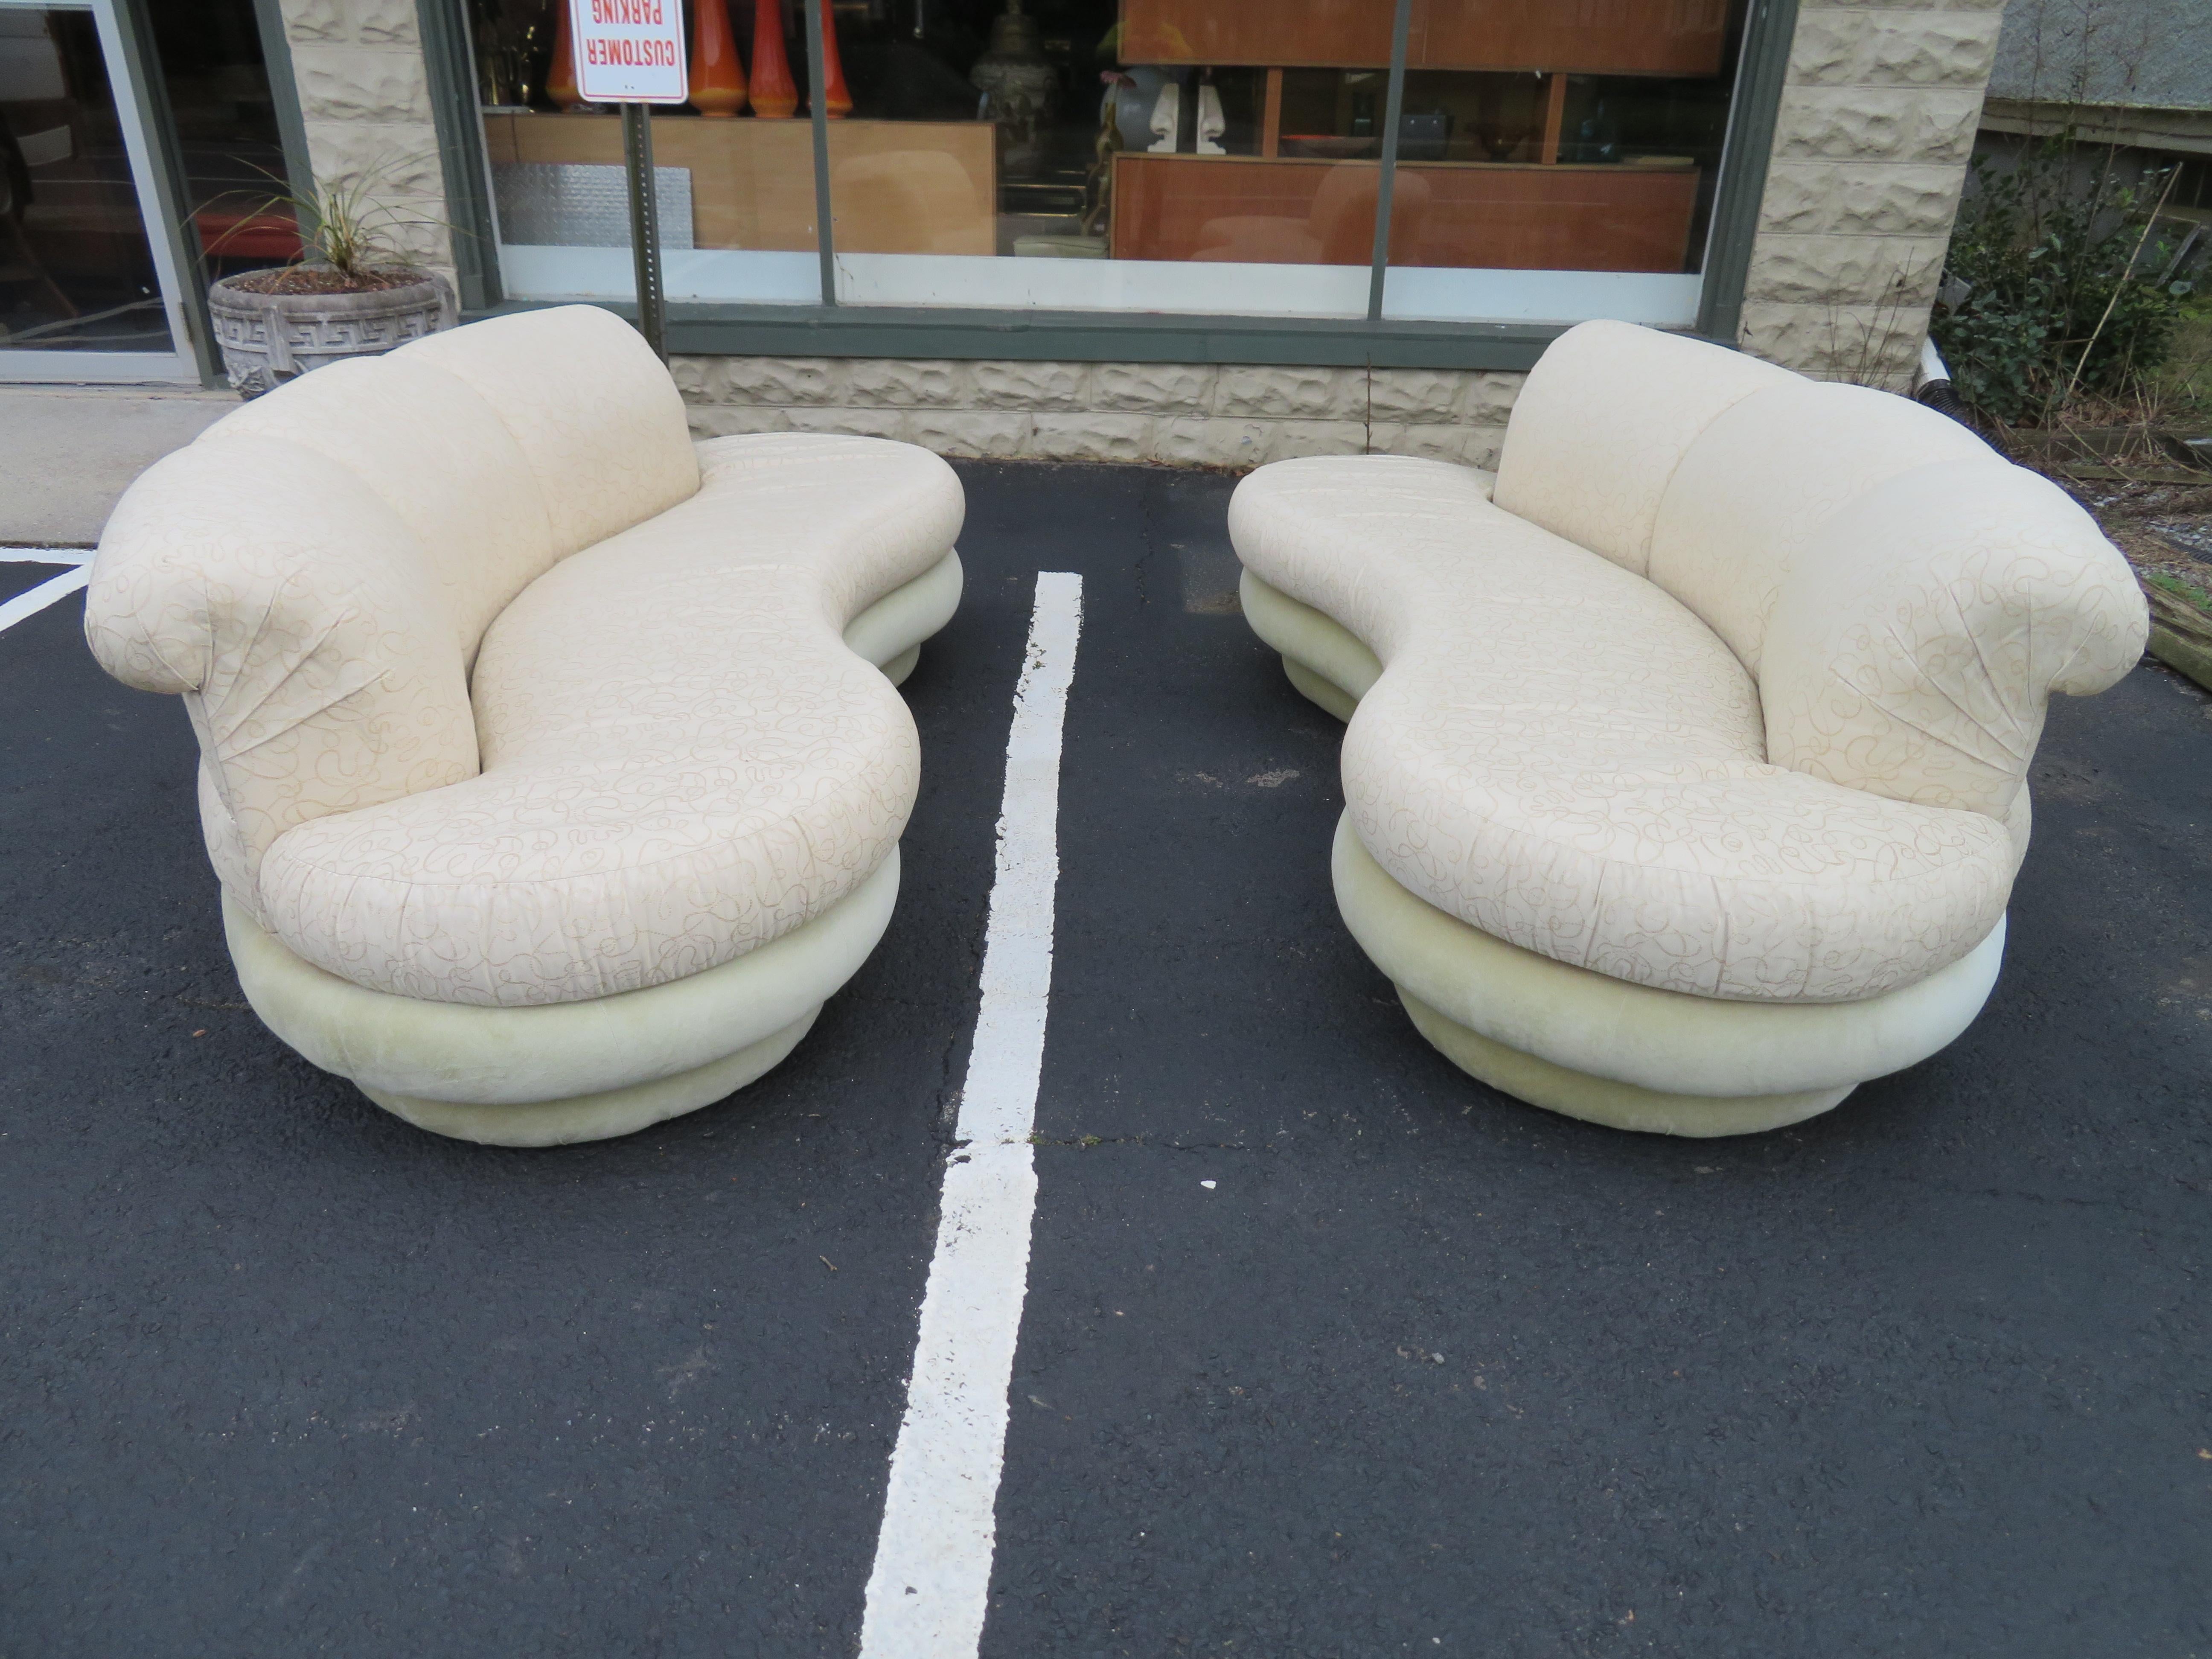 Fantastic pair of Adrian Pearsall for Comfort Designs curved kidney shaped sofas. Sofas retain their original upholstery in not bad condition but we would recommend they get new upholstery. They measure 30